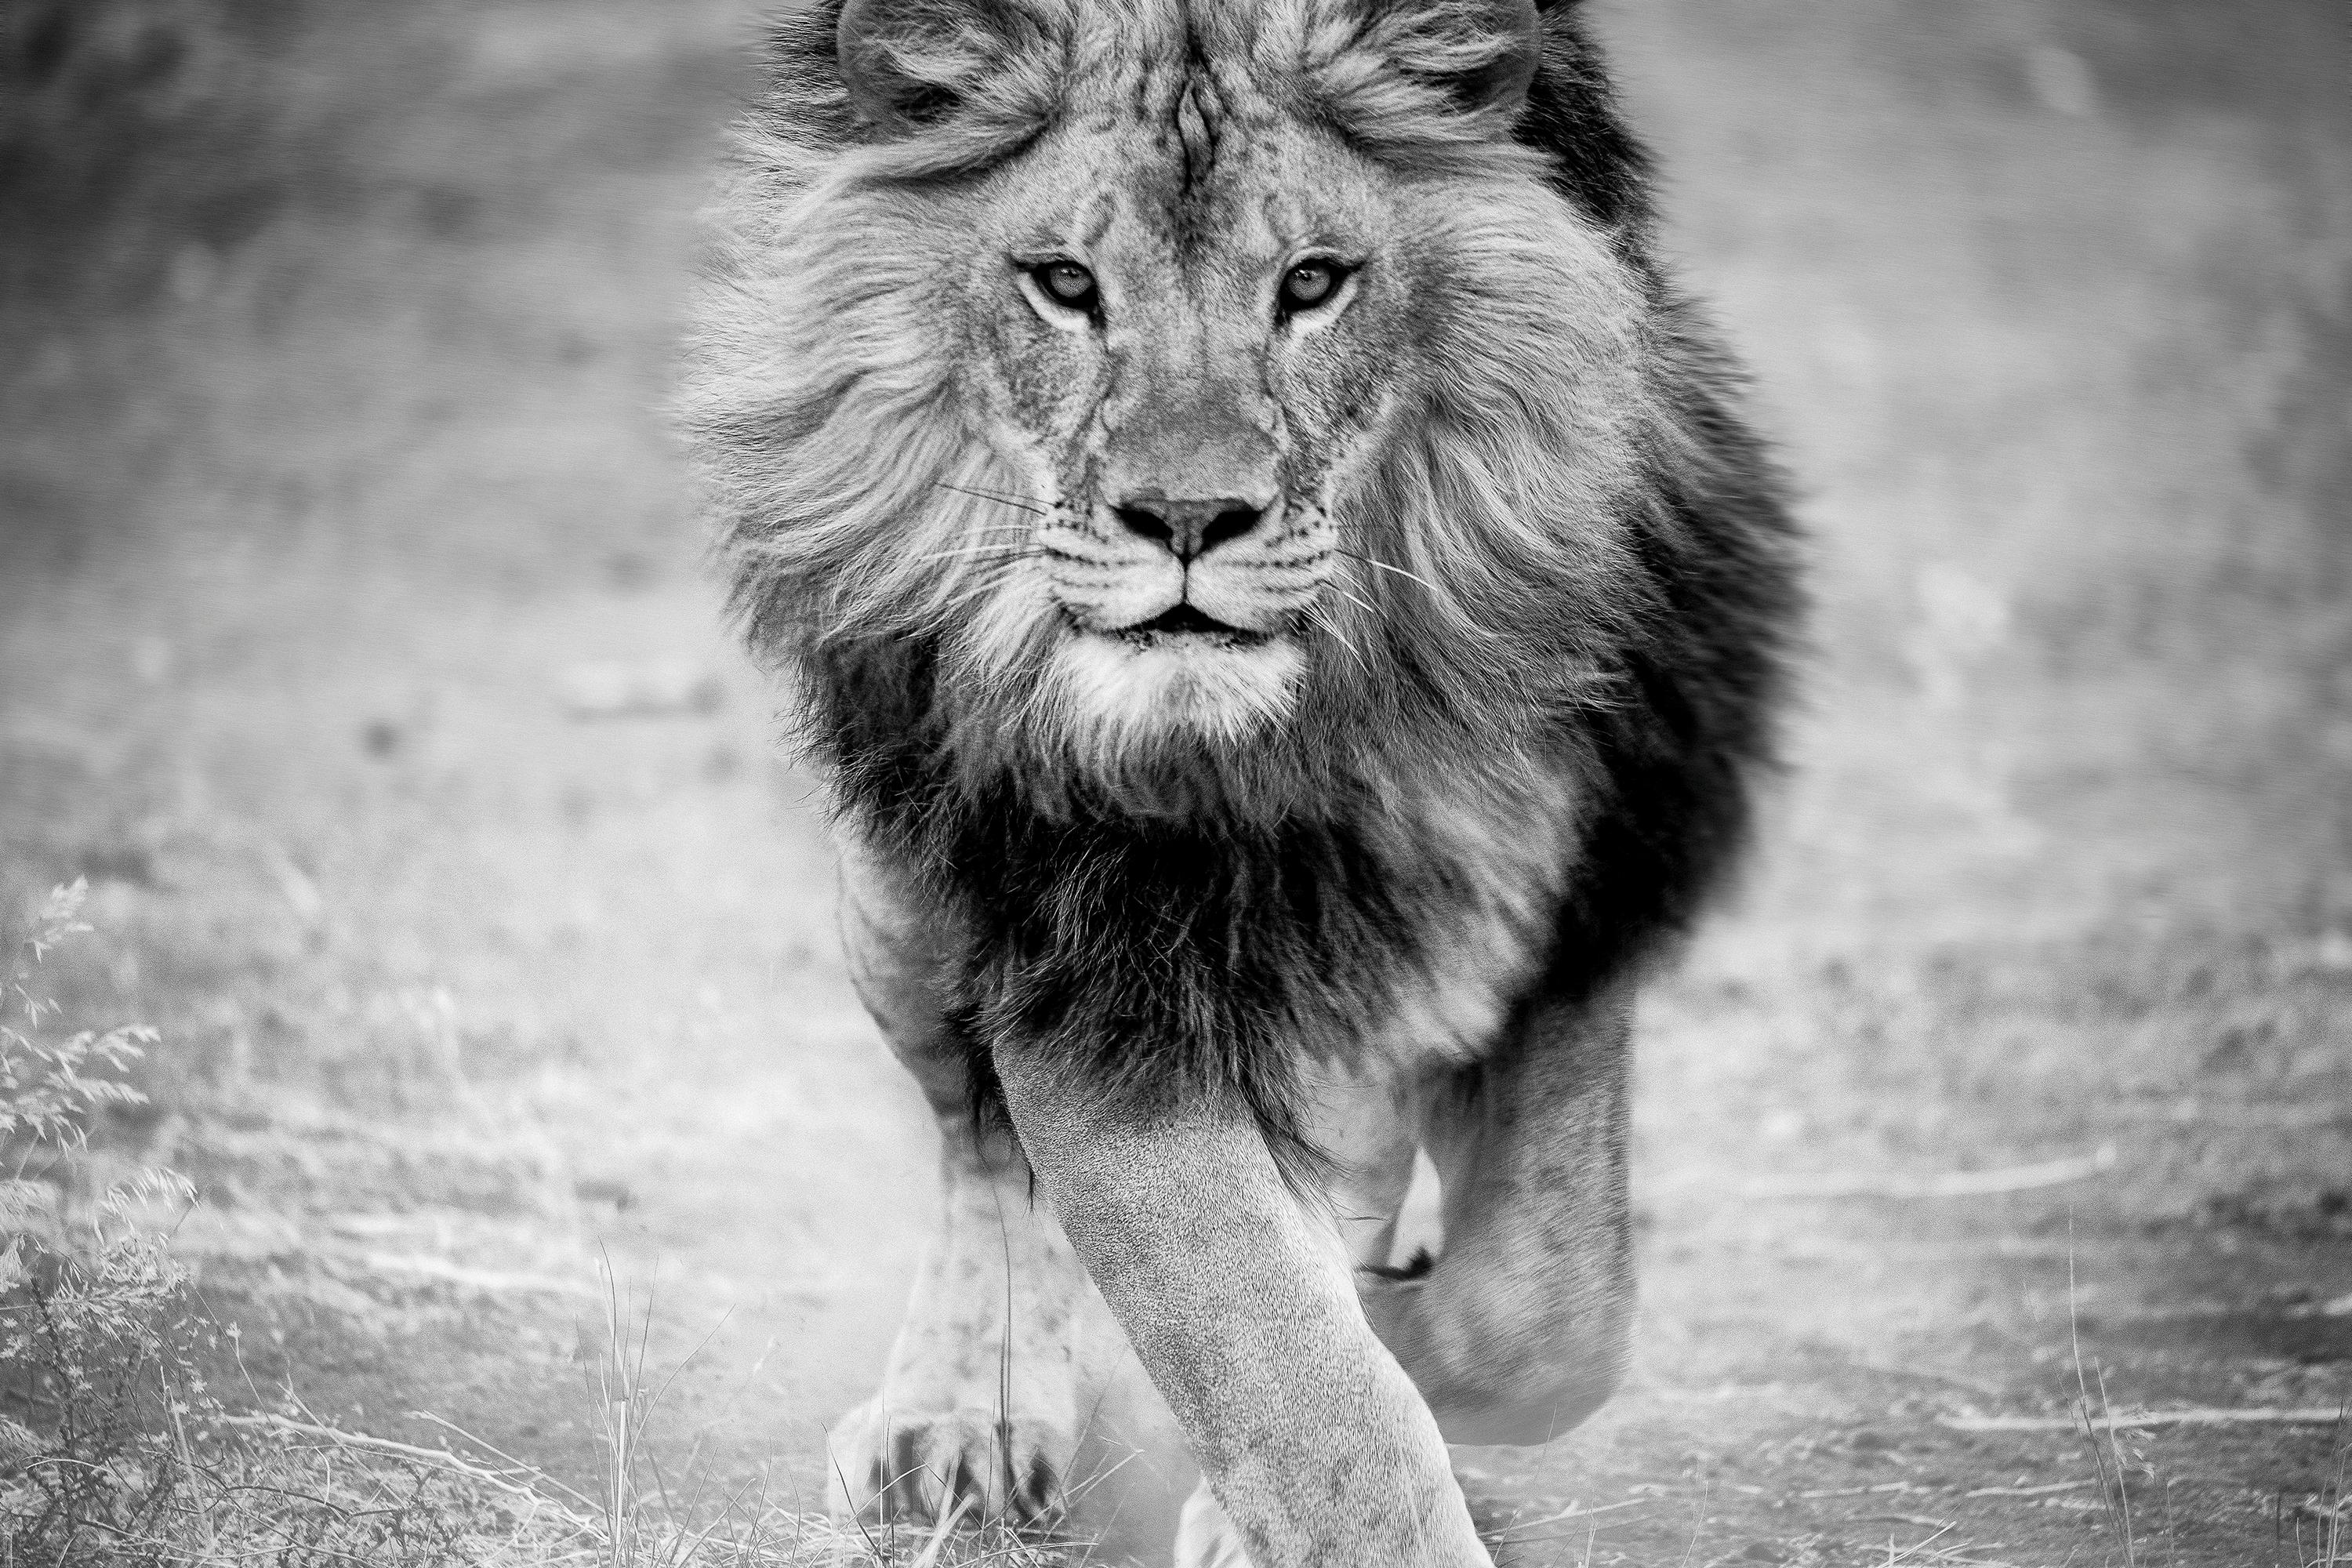 Shane Russeck Animal Print - Panthera Leo - 40x60, Black and White Lion Photograph, Lion Photography Unsigned